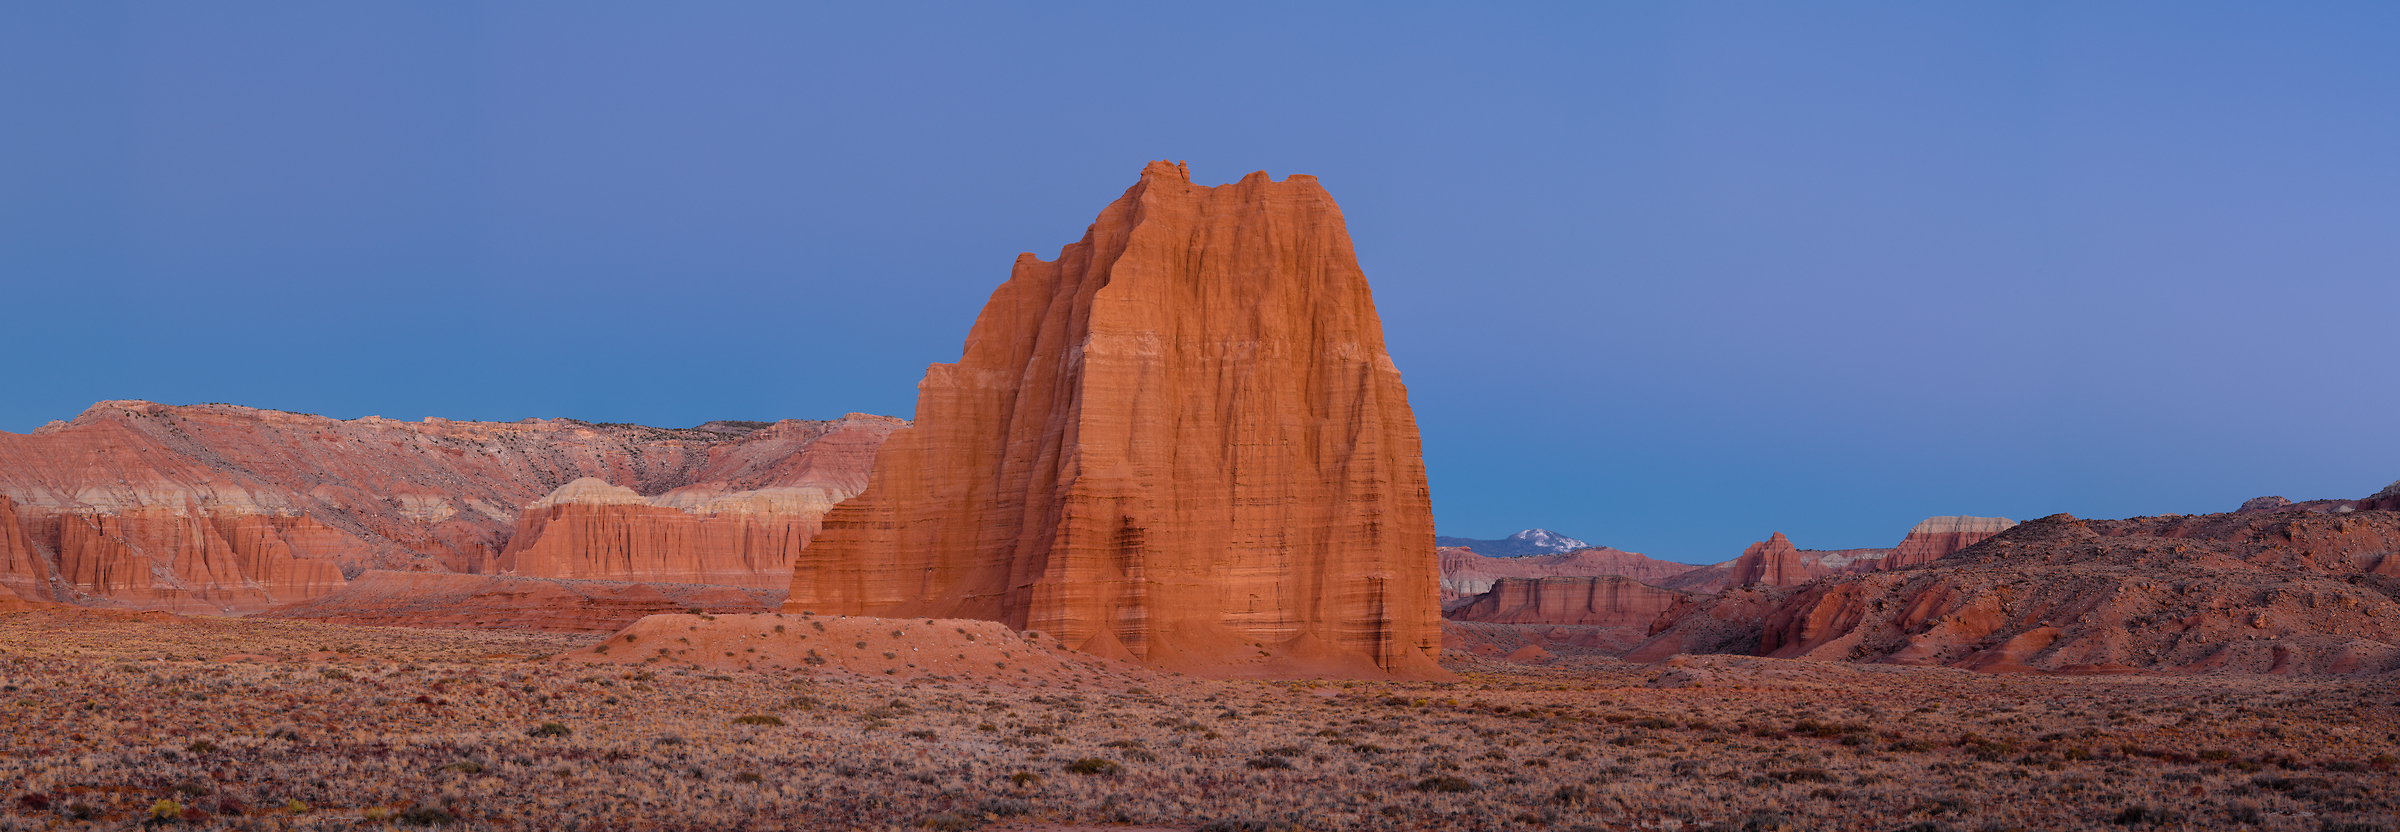 380 megapixels! A very high resolution, large-format VAST photo print of Temple of the Sun in Capitol Reef National Park; landscape photograph created by Greg Probst in Capitol Reef National Park, Utah